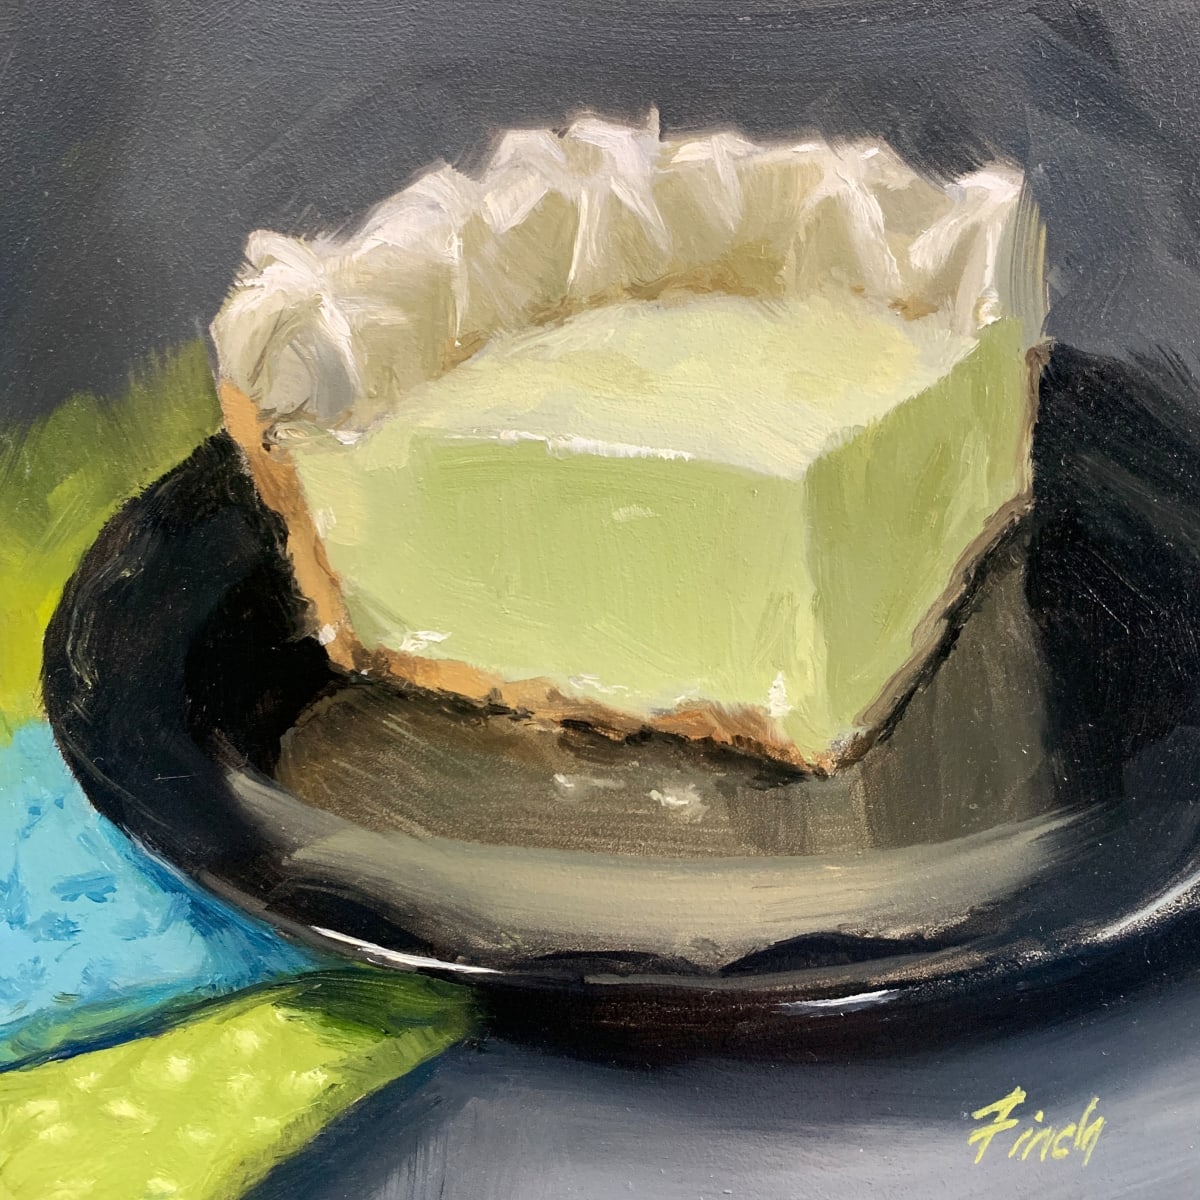 Key Lime Coma by Rebecca Finch  Image: Nothing better than a good, tart Key Lime Pie!